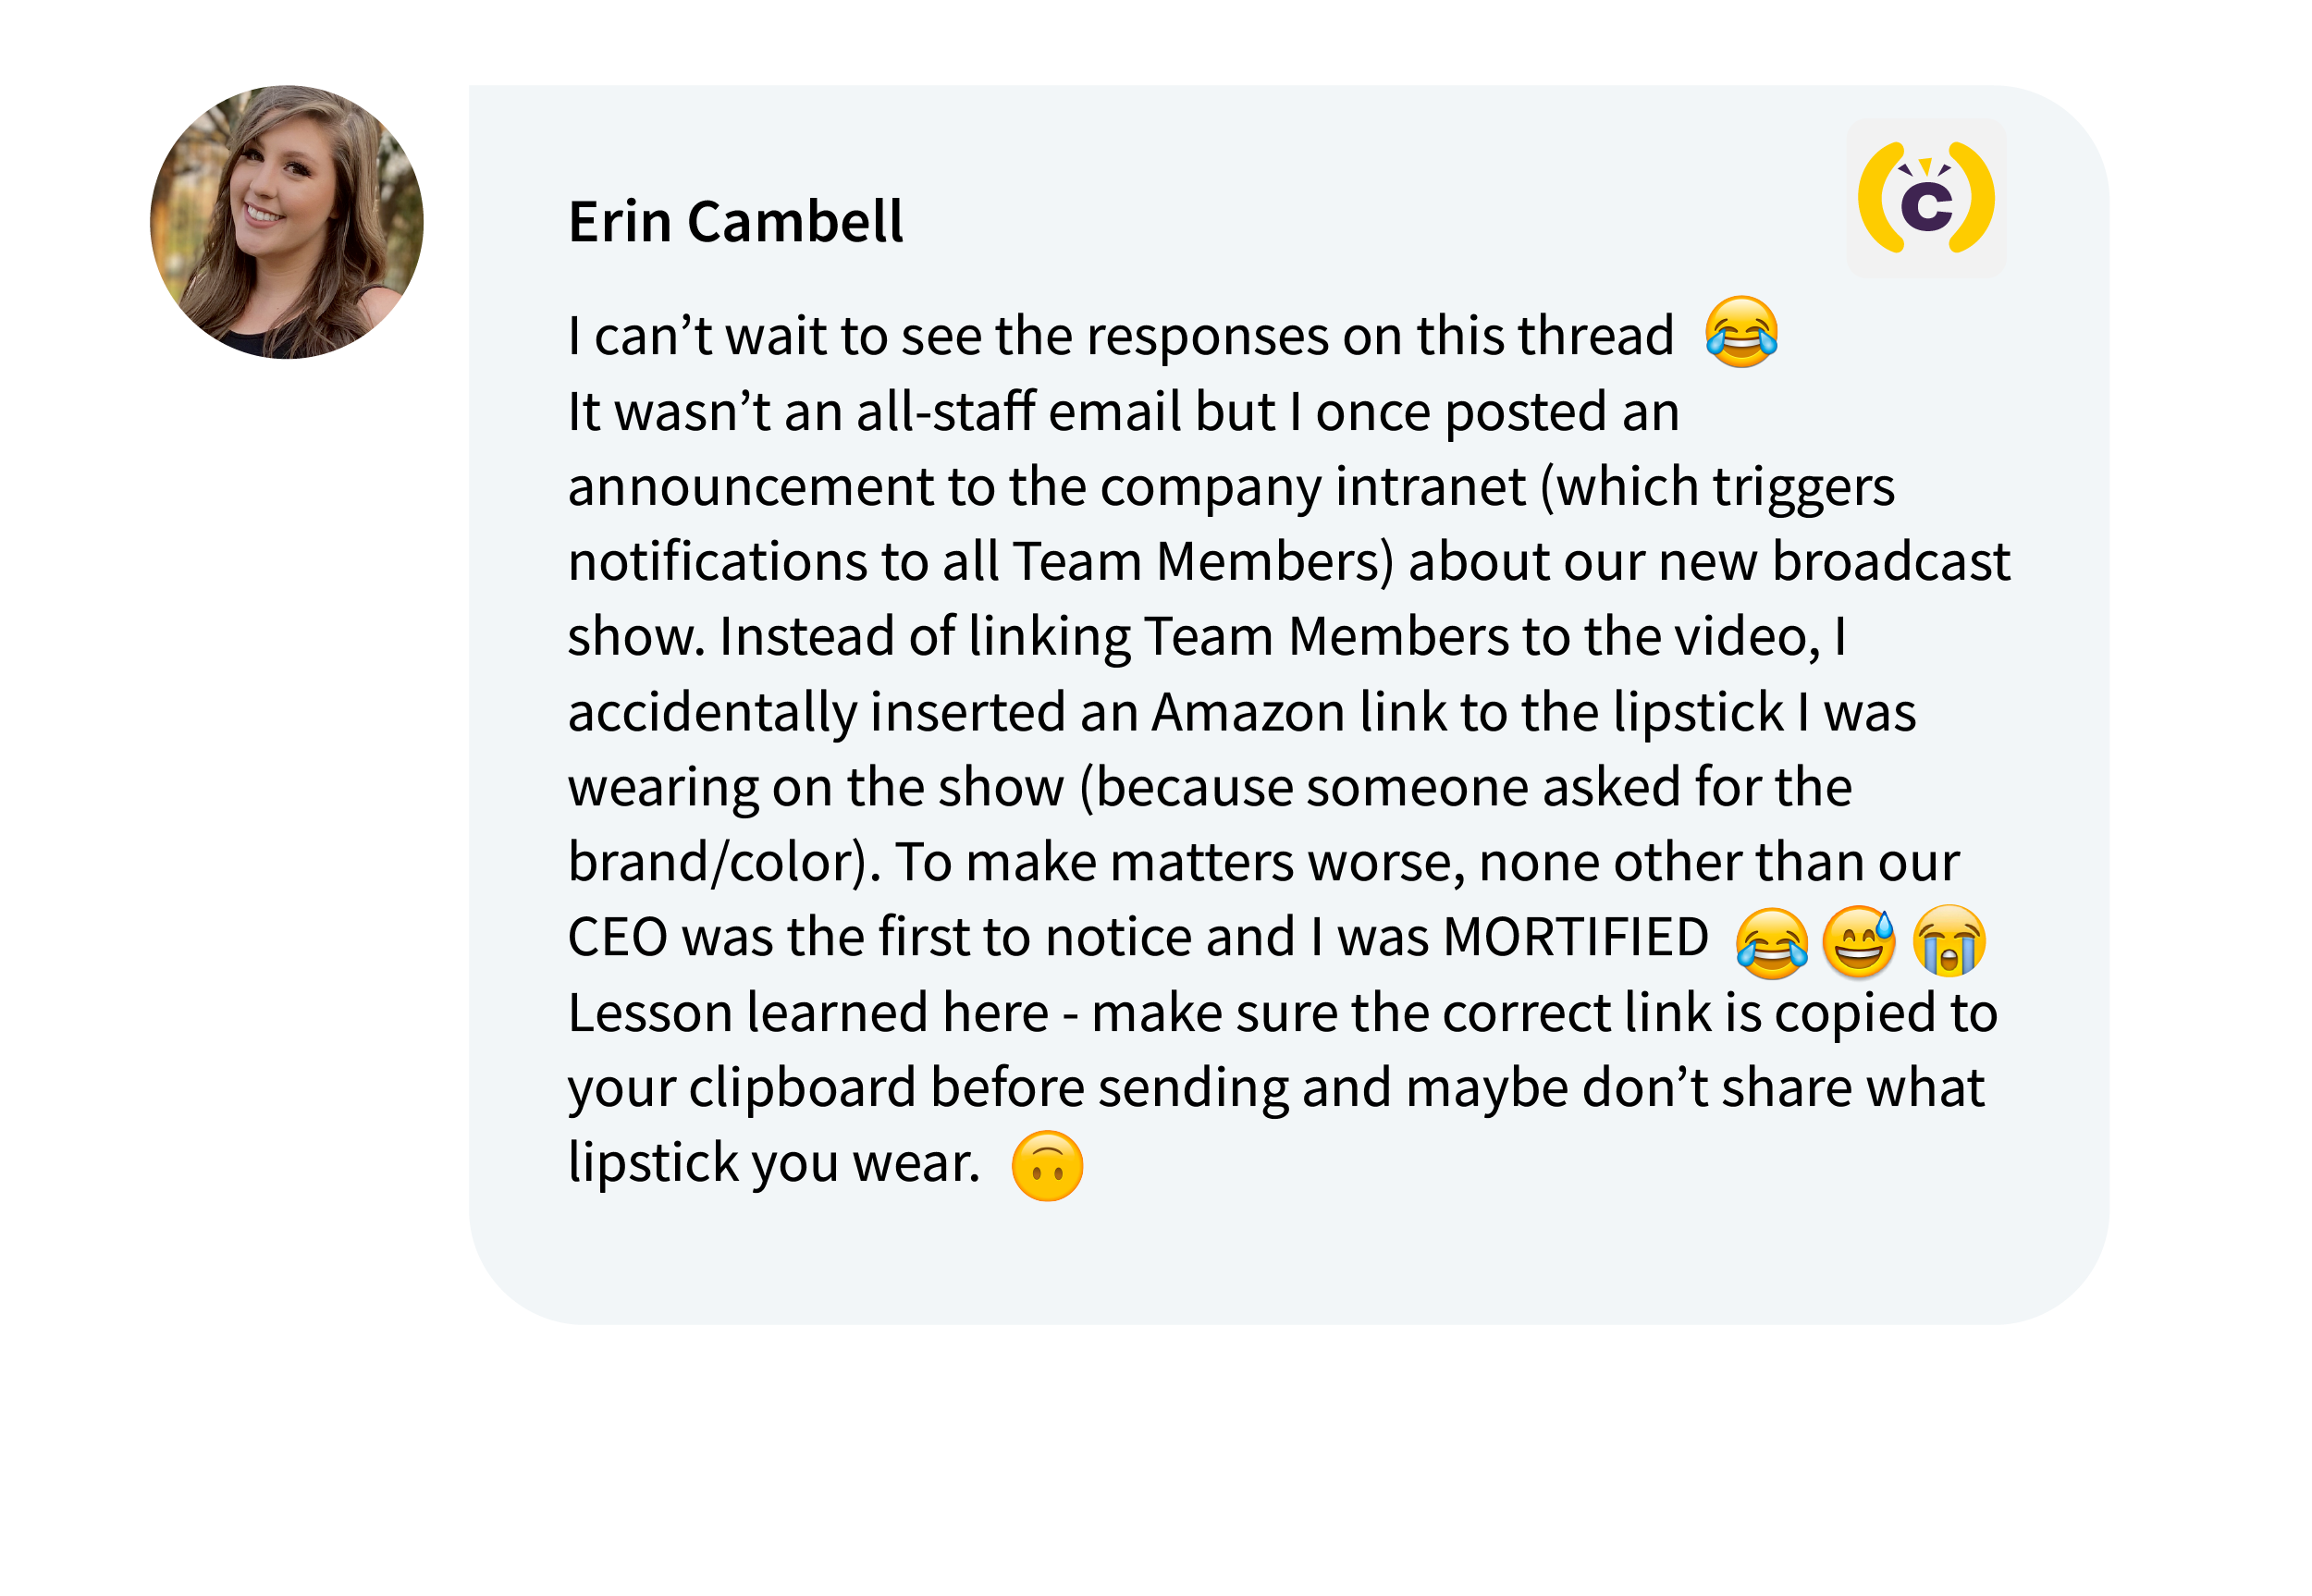 Erin Campbell on Comms-unity: I can’t wait to see the responses on this thread. It wasn’t an all-staff email but I once posted an announcement to the company intranet (which triggers notifications to all Team Members) about our new broadcast show. Instead of linking Team Members to the video, I accidentally inserted an Amazon link to the lipstick I was wearing on the show (because someone asked for the brand/color). To make matters worse, none other than our CEO was the first to notice and I was MORTIFIED. Lesson learned here - make sure the correct link is copied to your clipboard before sending and maybe don’t share what lipstick you wear. 